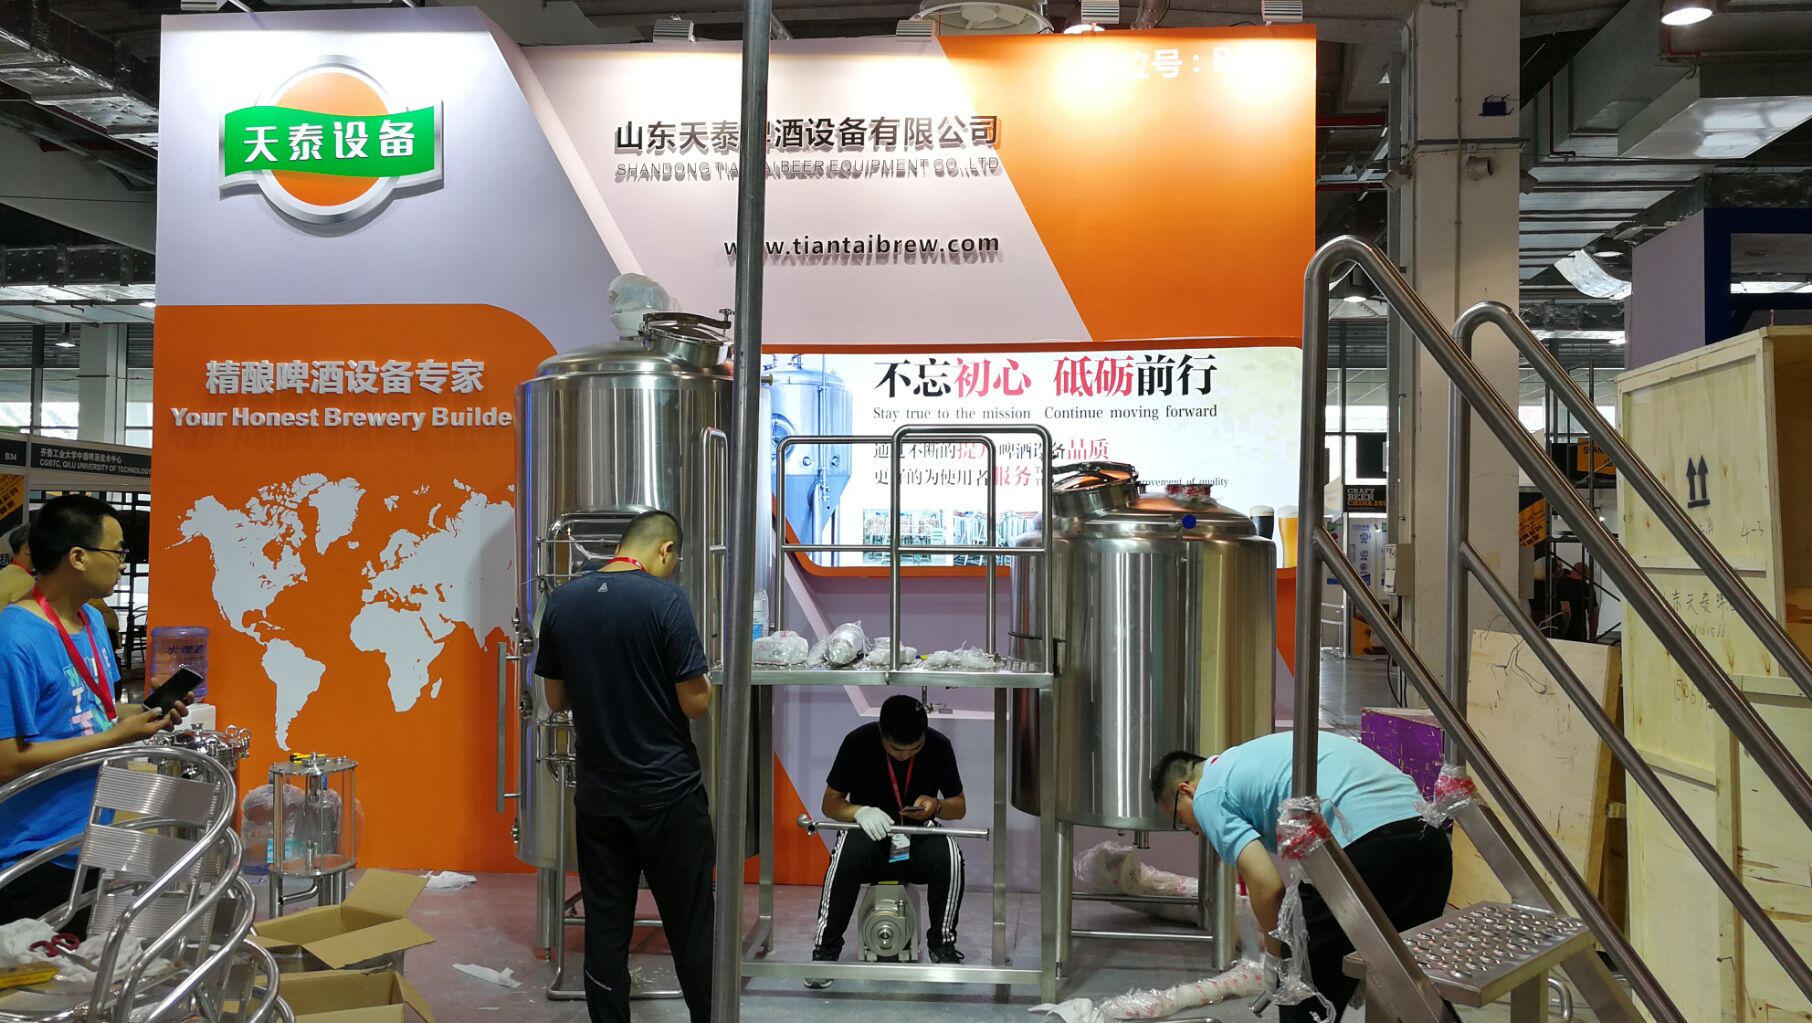 <b>We are at Craft Beer China Conference & Exhibition, where are you now?</b>